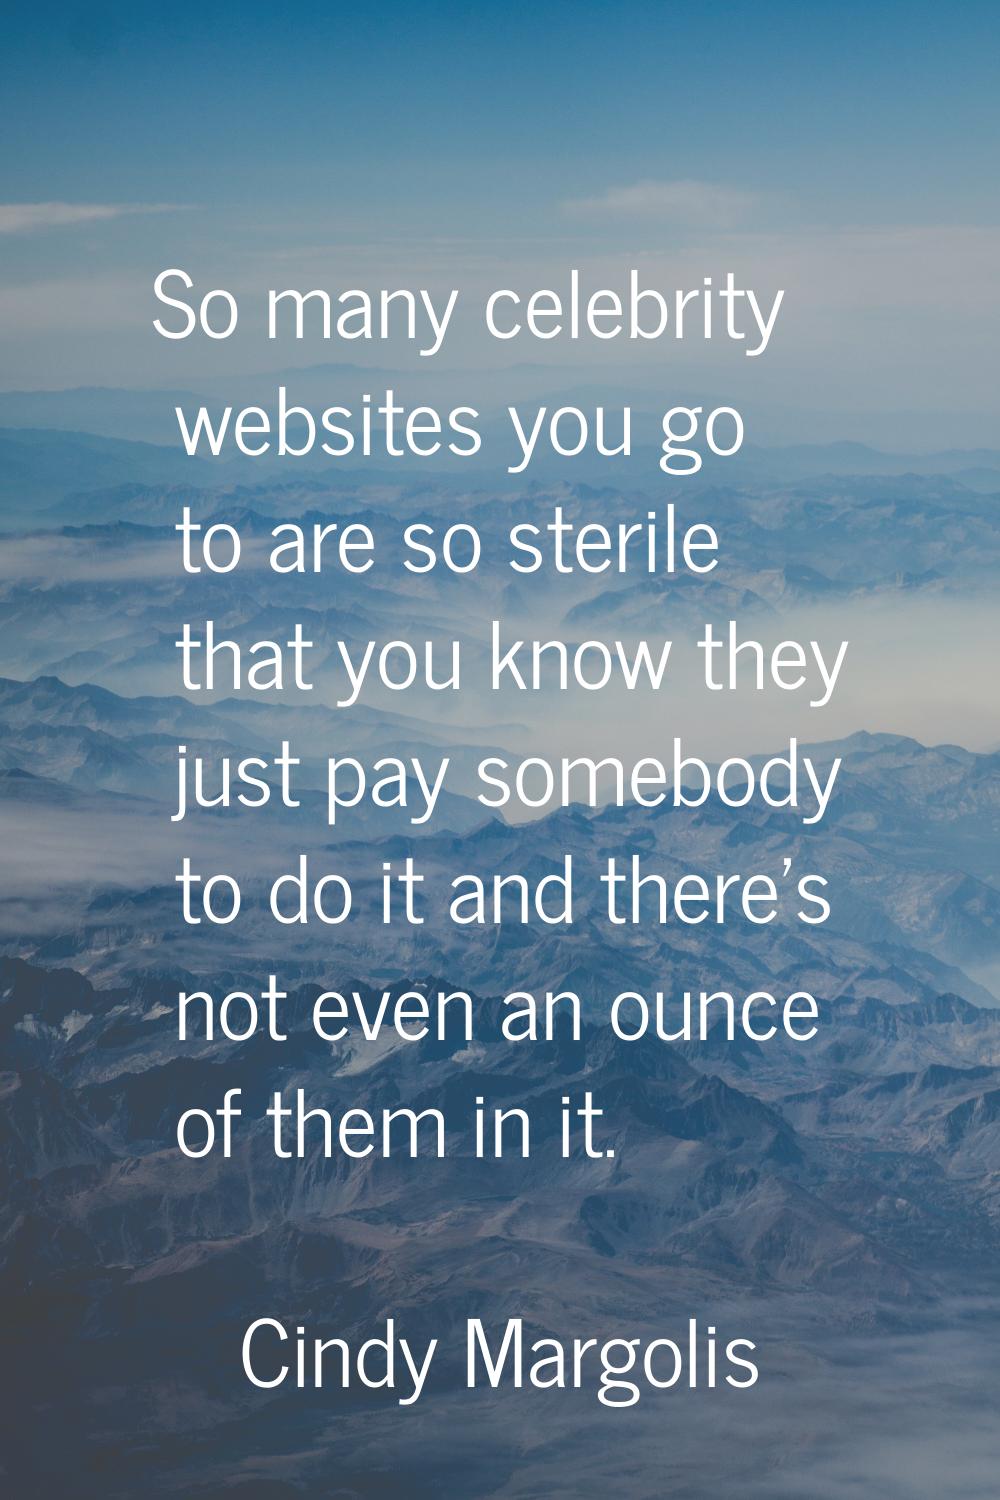 So many celebrity websites you go to are so sterile that you know they just pay somebody to do it a